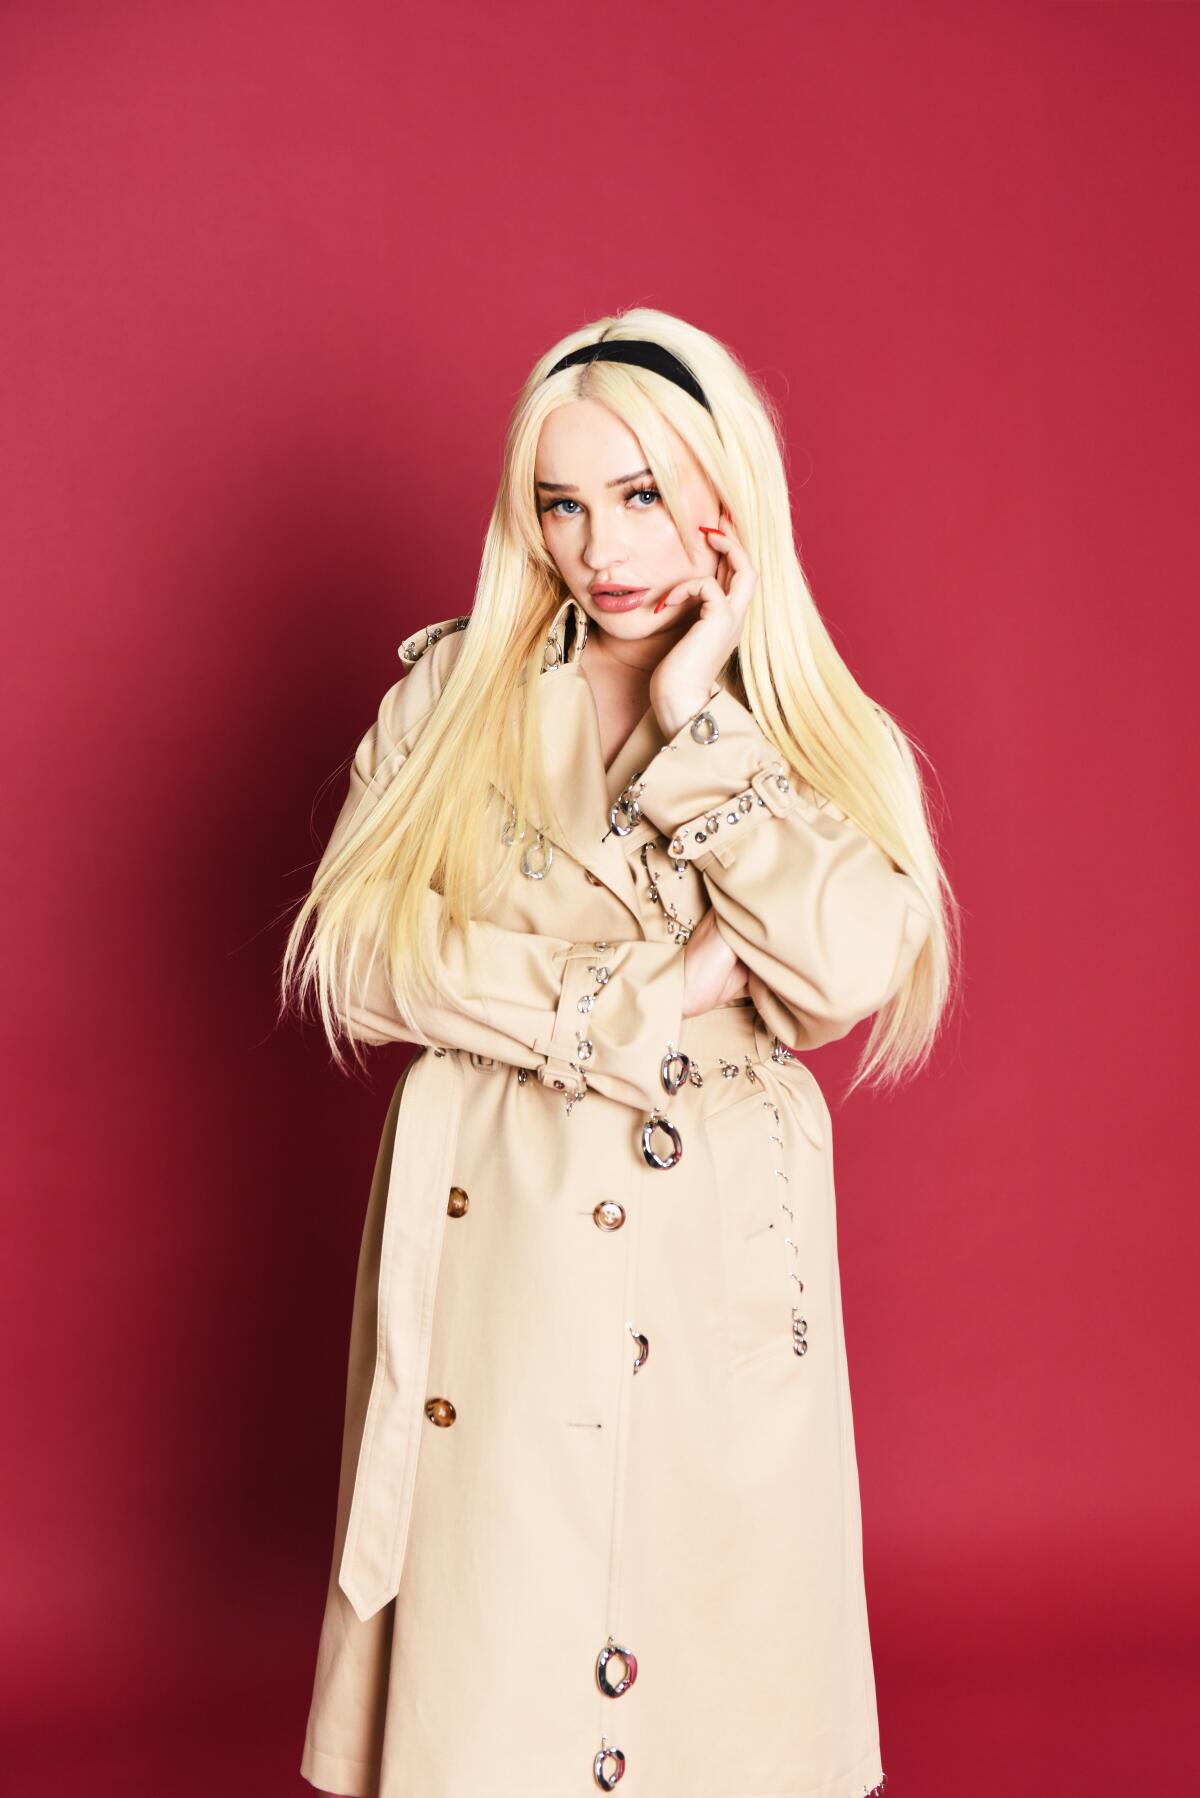 Kim Petras stands against a red background.